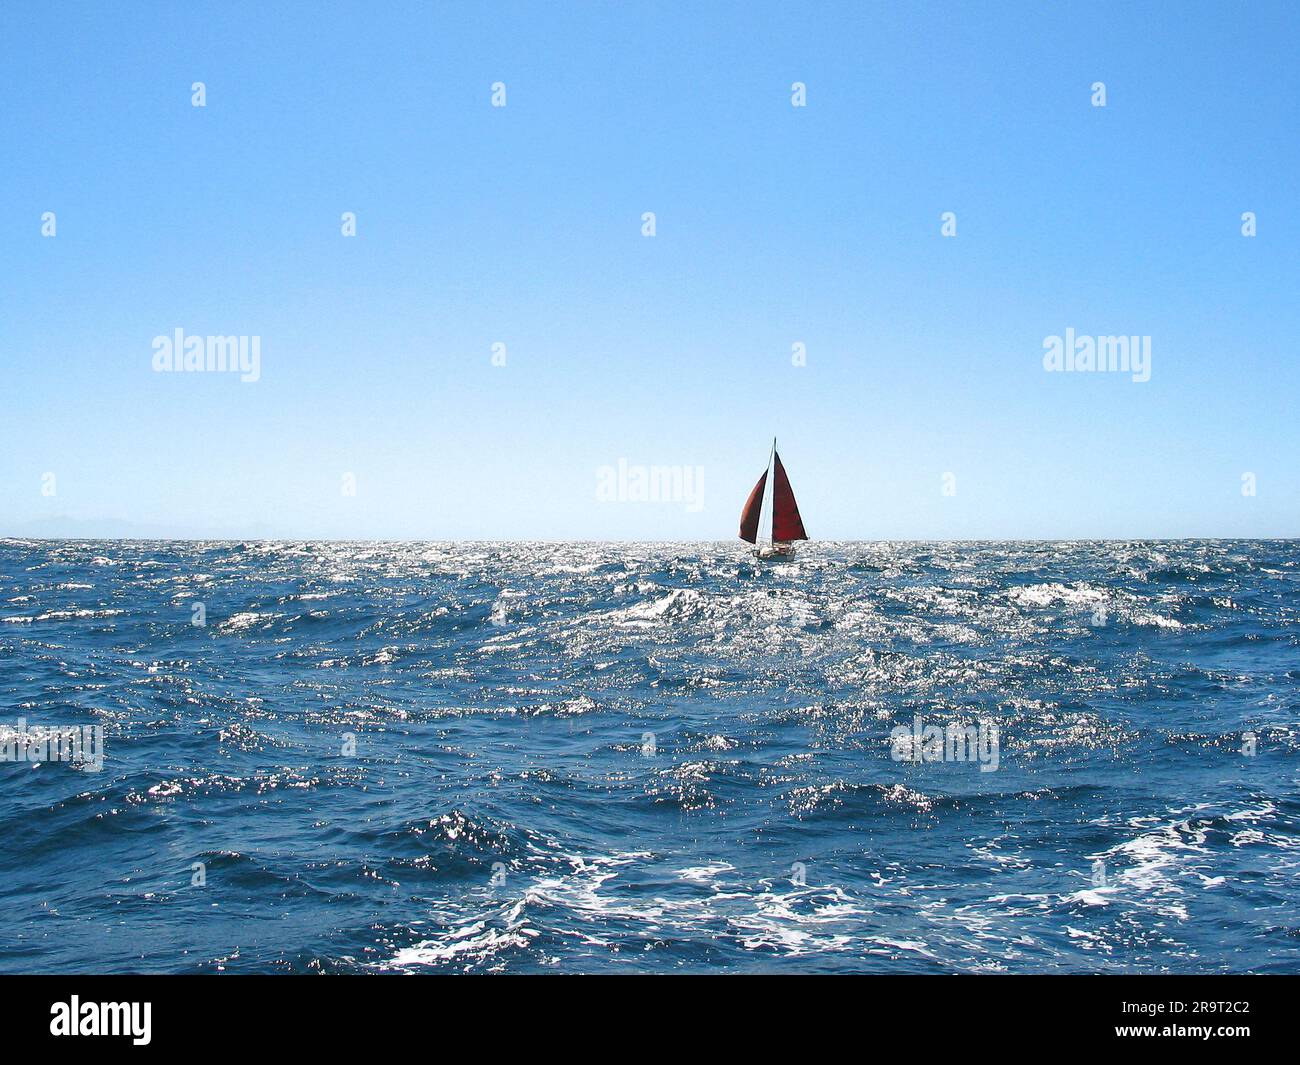 Silhouette of a small sailing boat on the horizon, blue ocean and perfect trade wind day at sea. Stock Photo